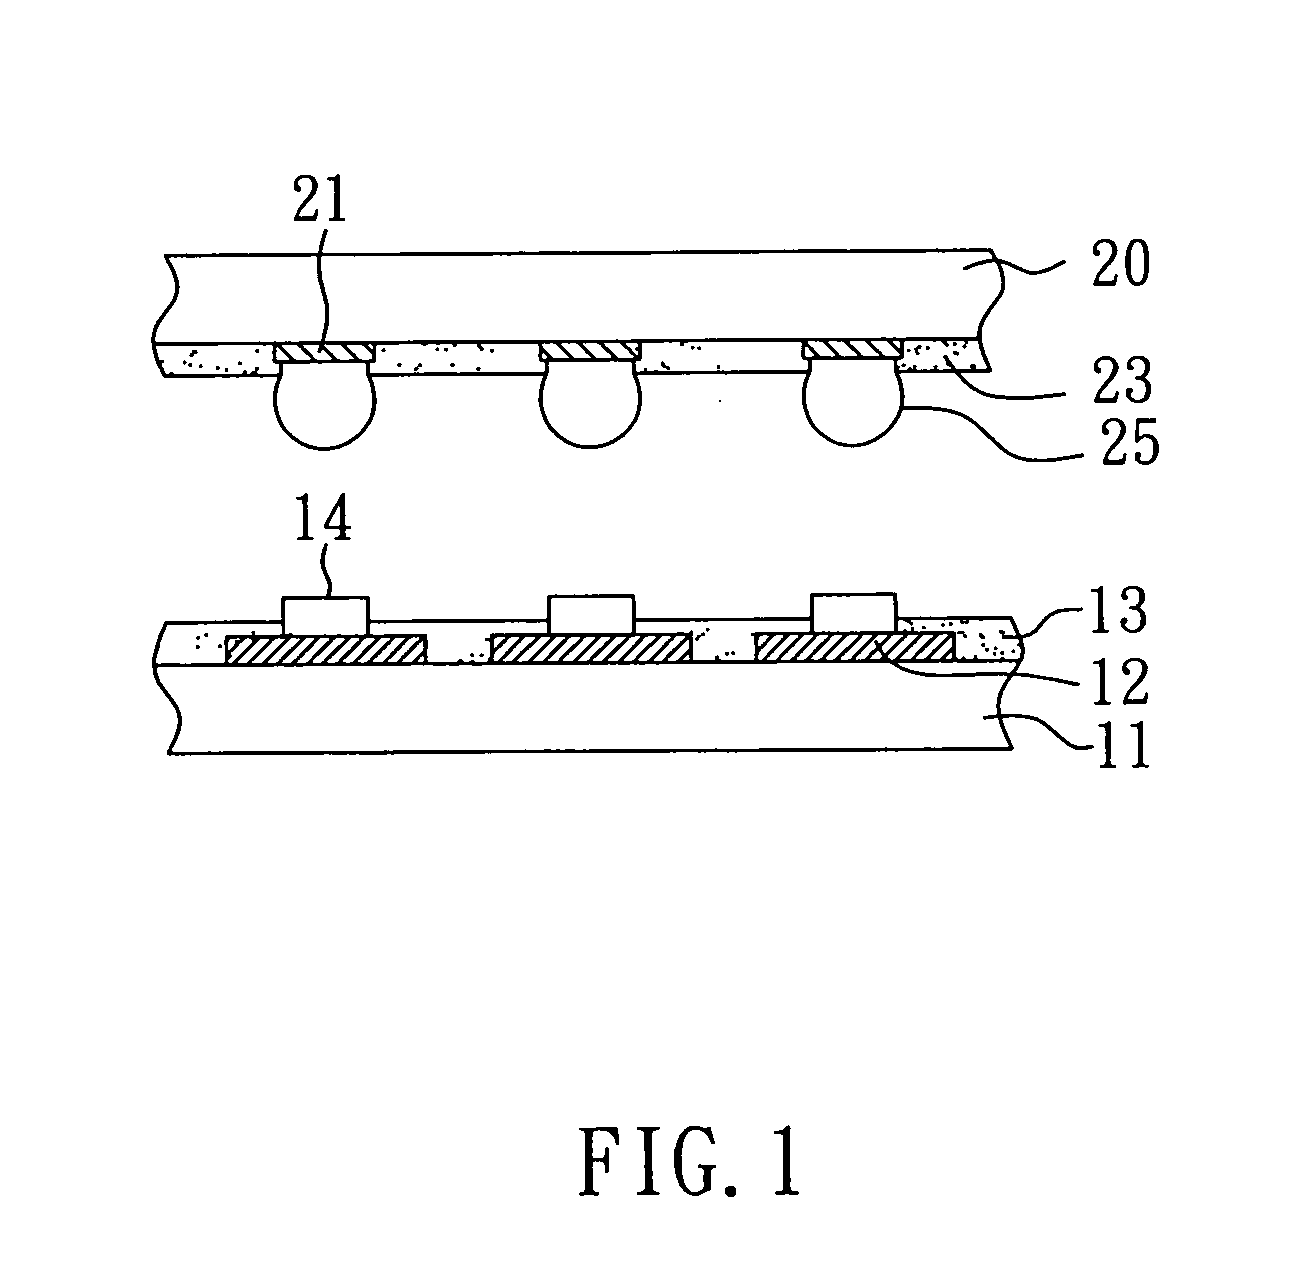 Flip-chip package structure, and the substrate and the chip thereof